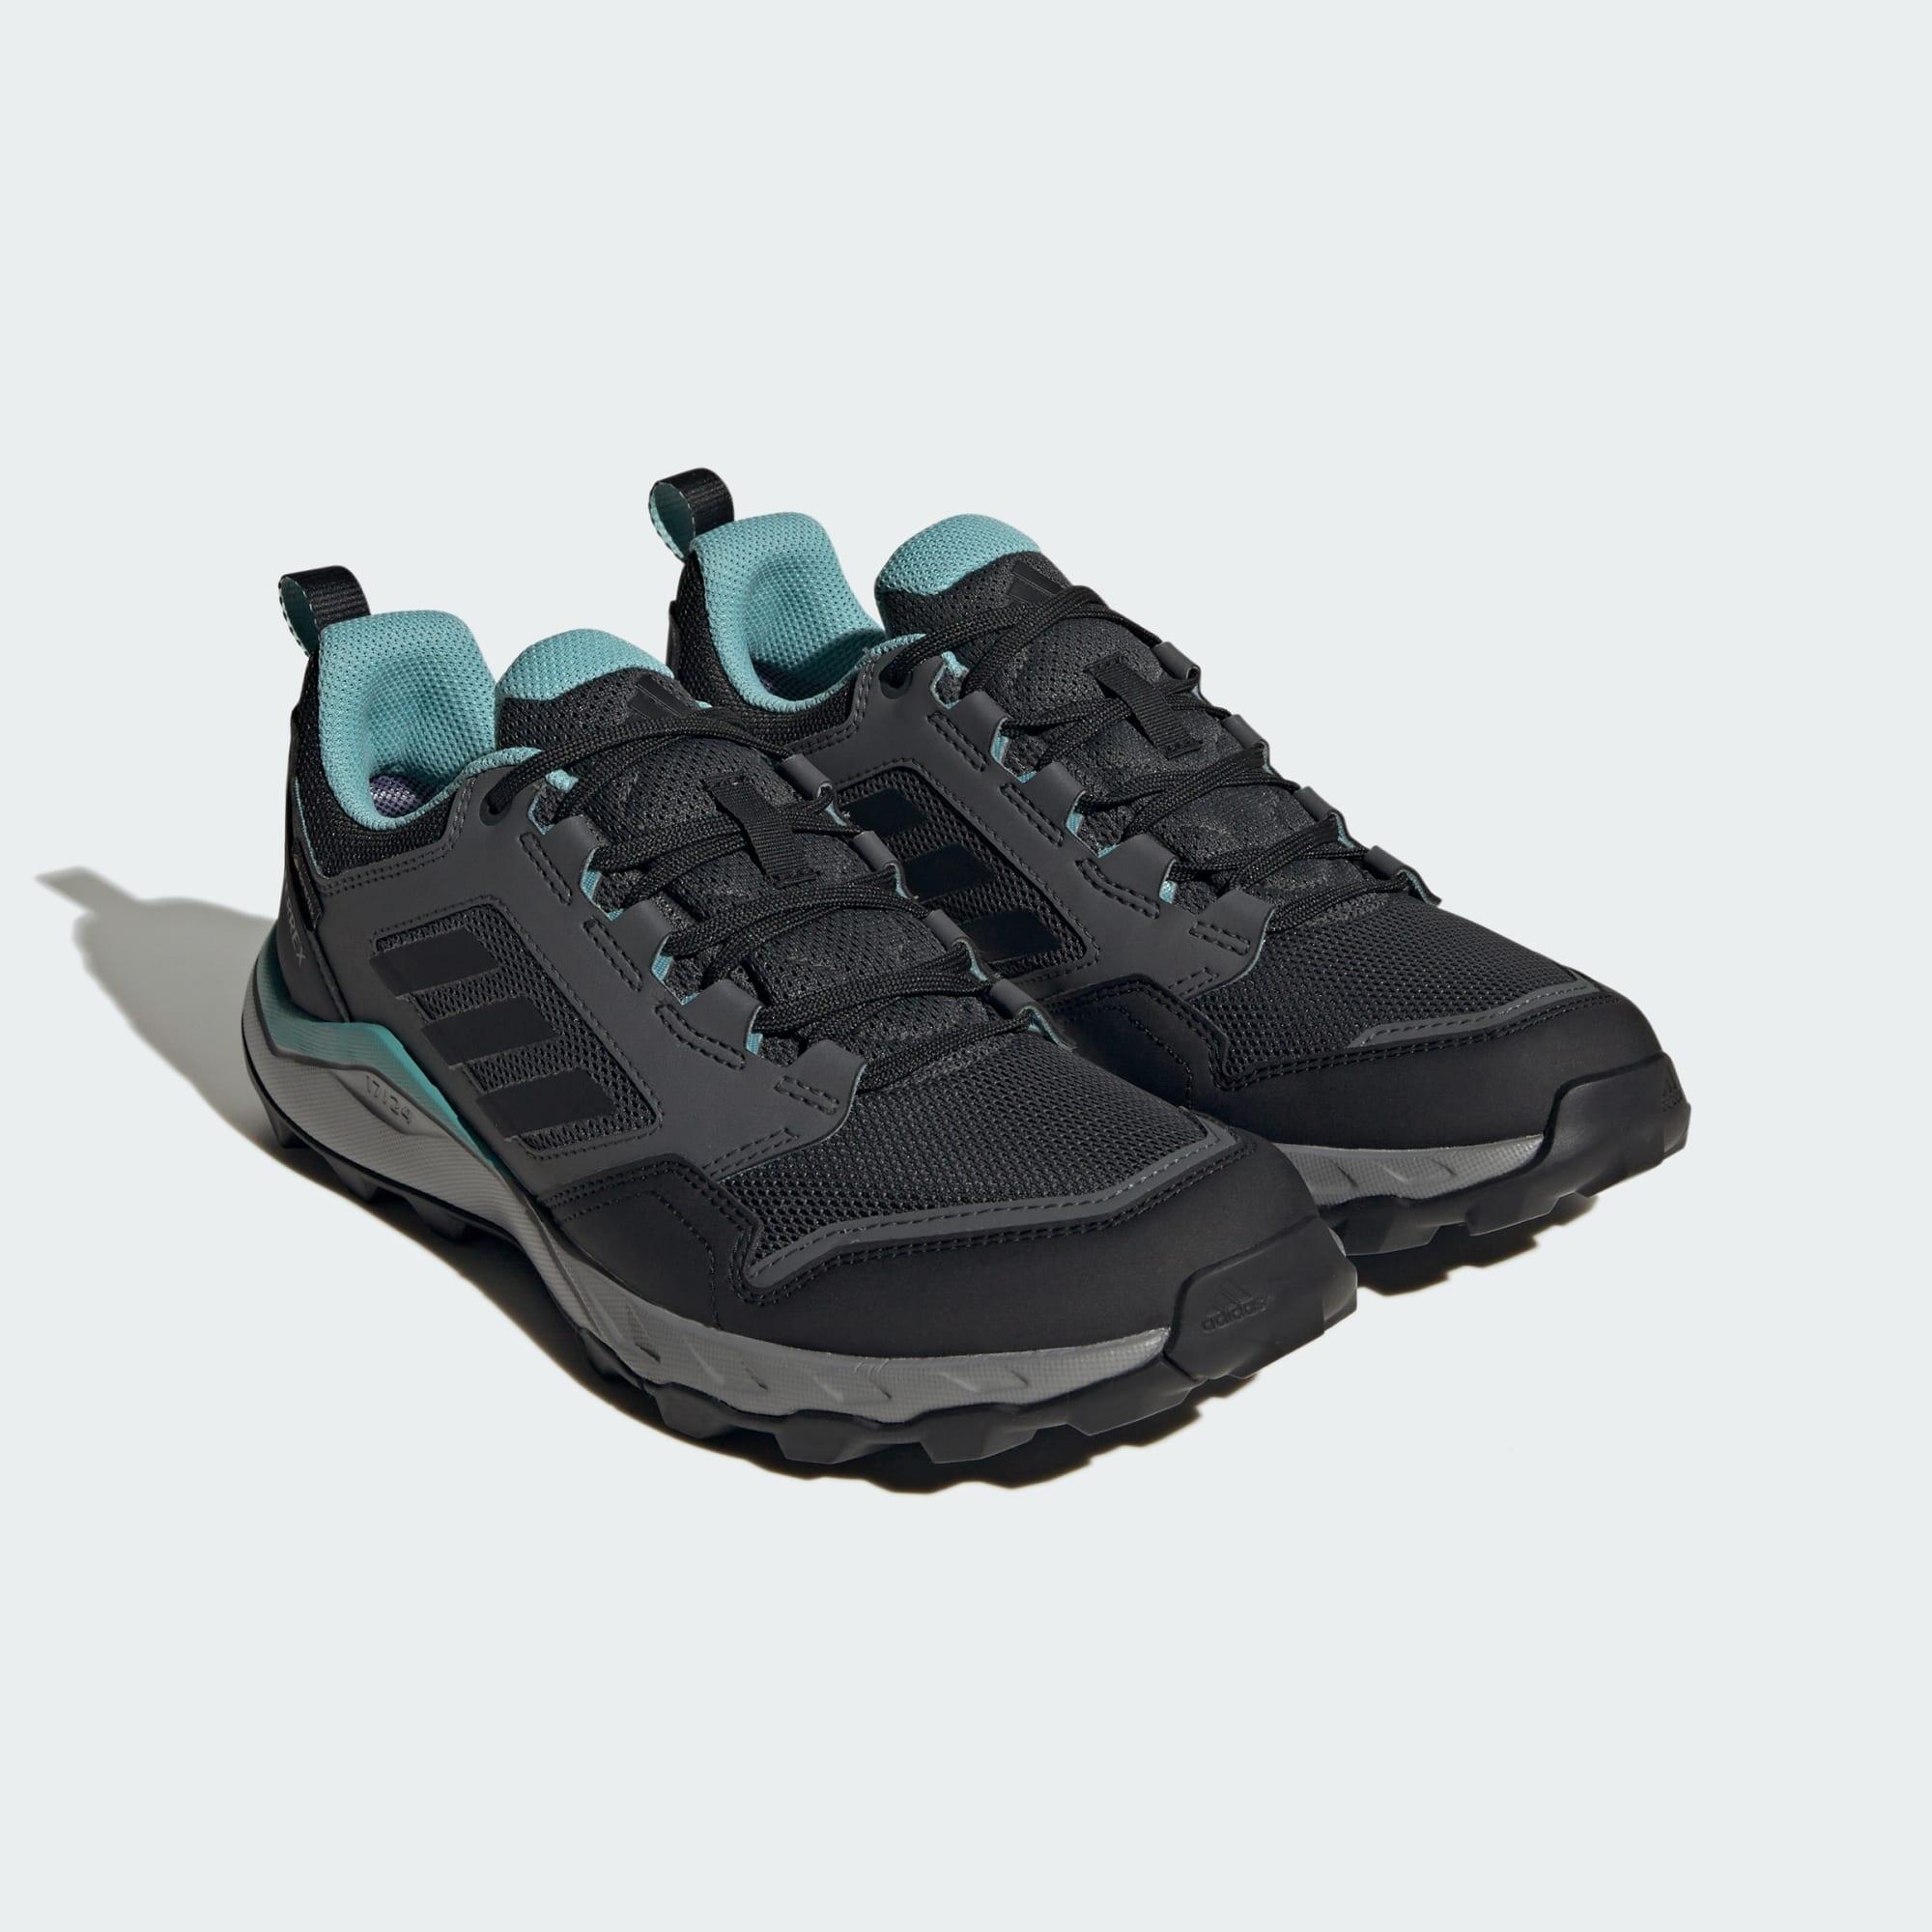 Tracerocker 2.0 GORE-TEX Trail Running Shoes 5/7